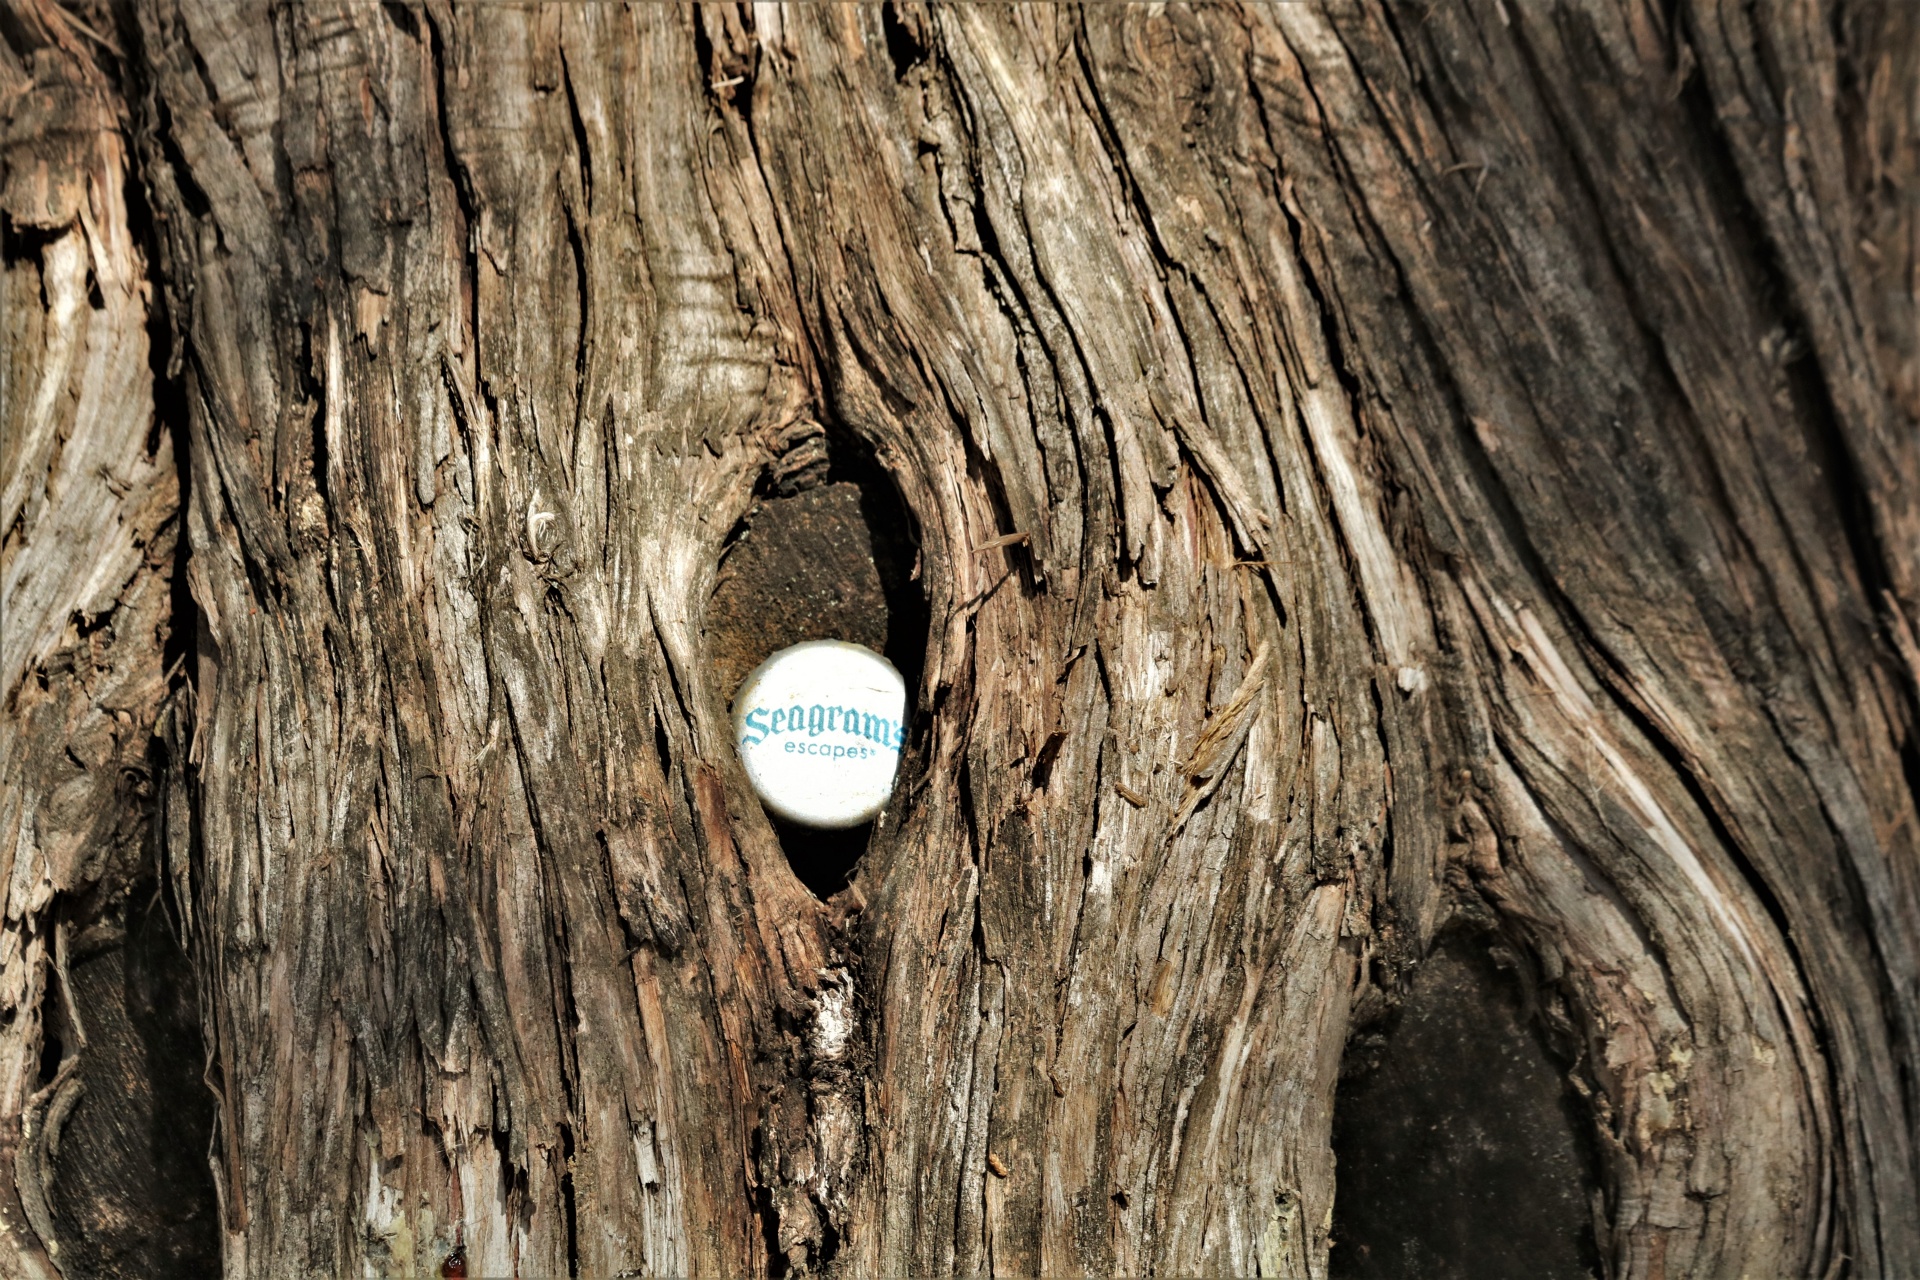 Close-up of a Seagrams bottle cap stuck in the trunk of a cedar tree.